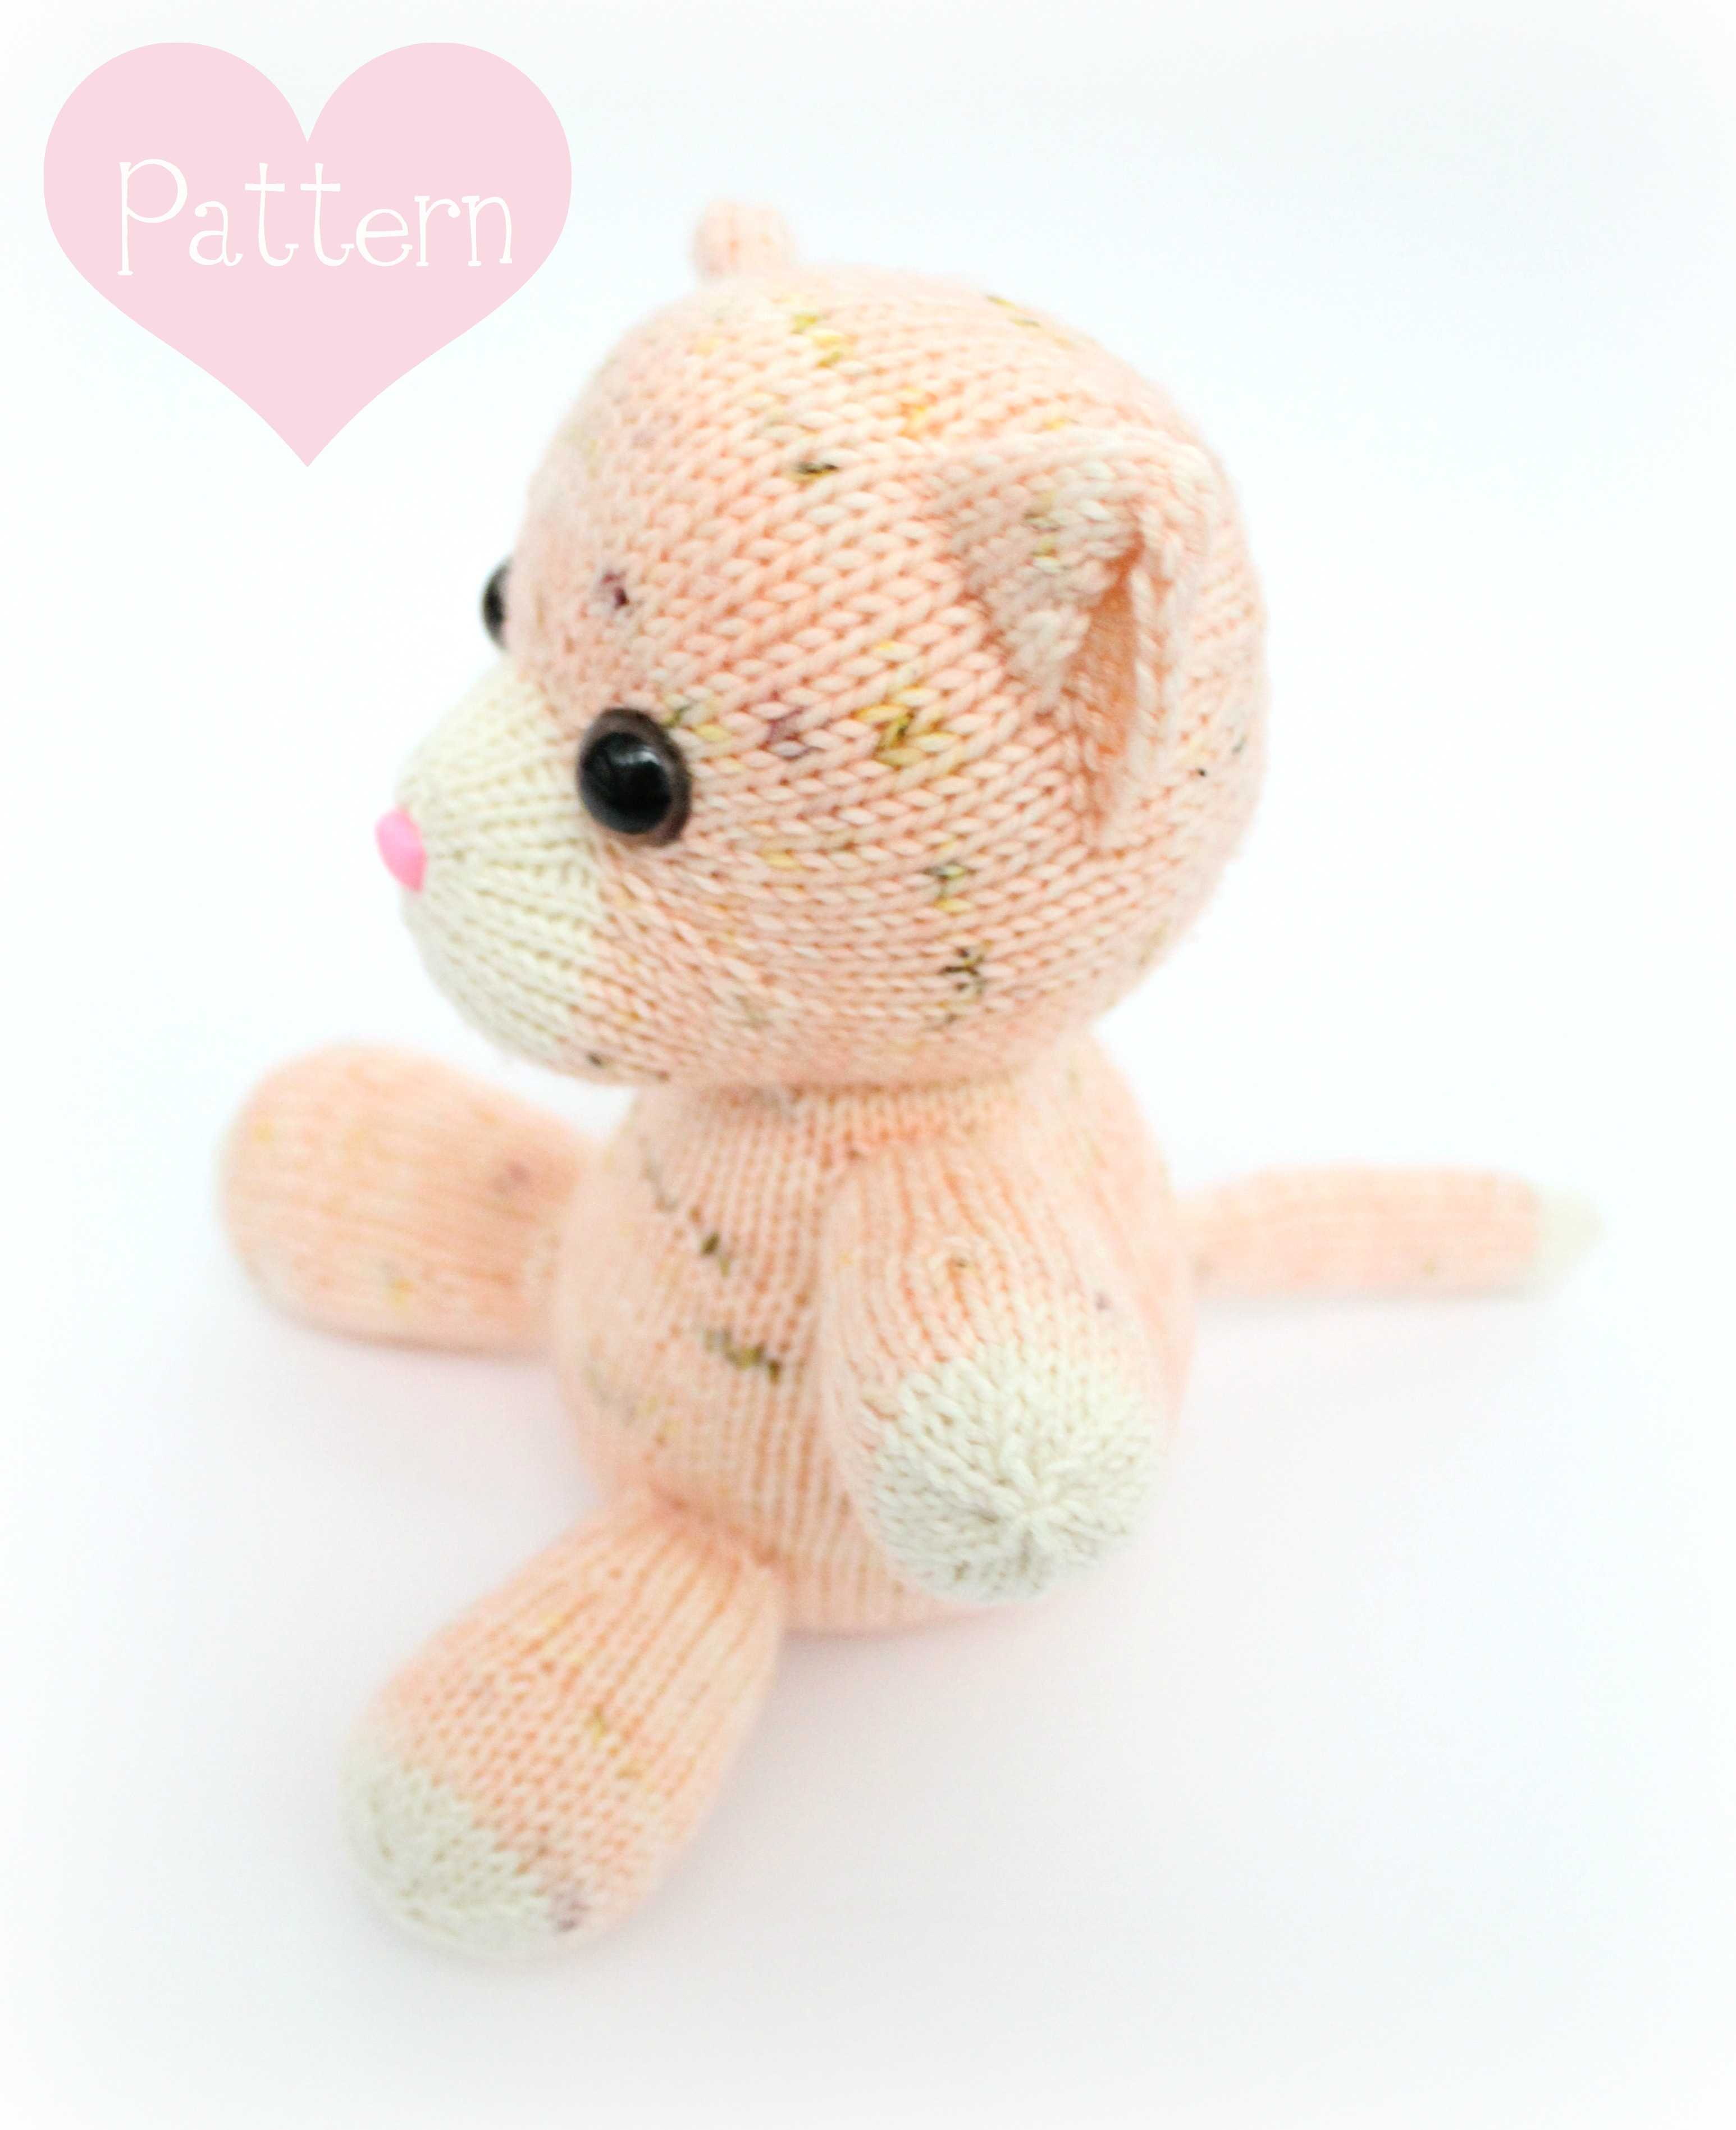 Knitting Patterns For Toys Uk Free Knitting Patterns For Toy Cats